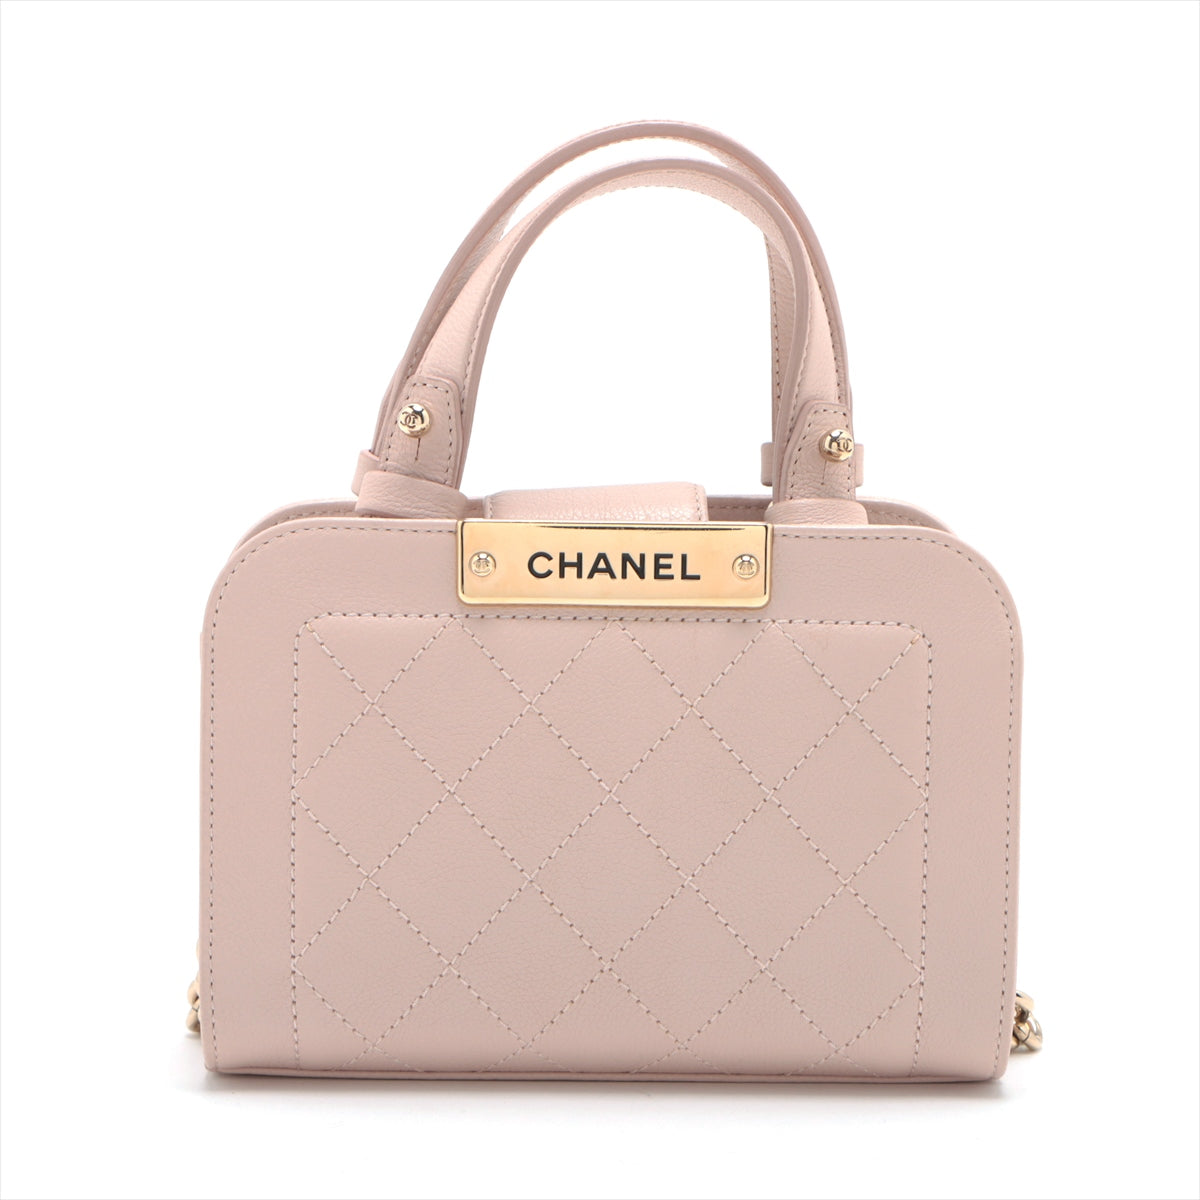 Chanel Matelasse Leather 2way handbag logo plate Pink Gold Metal fittings 23XXXXXX A93731